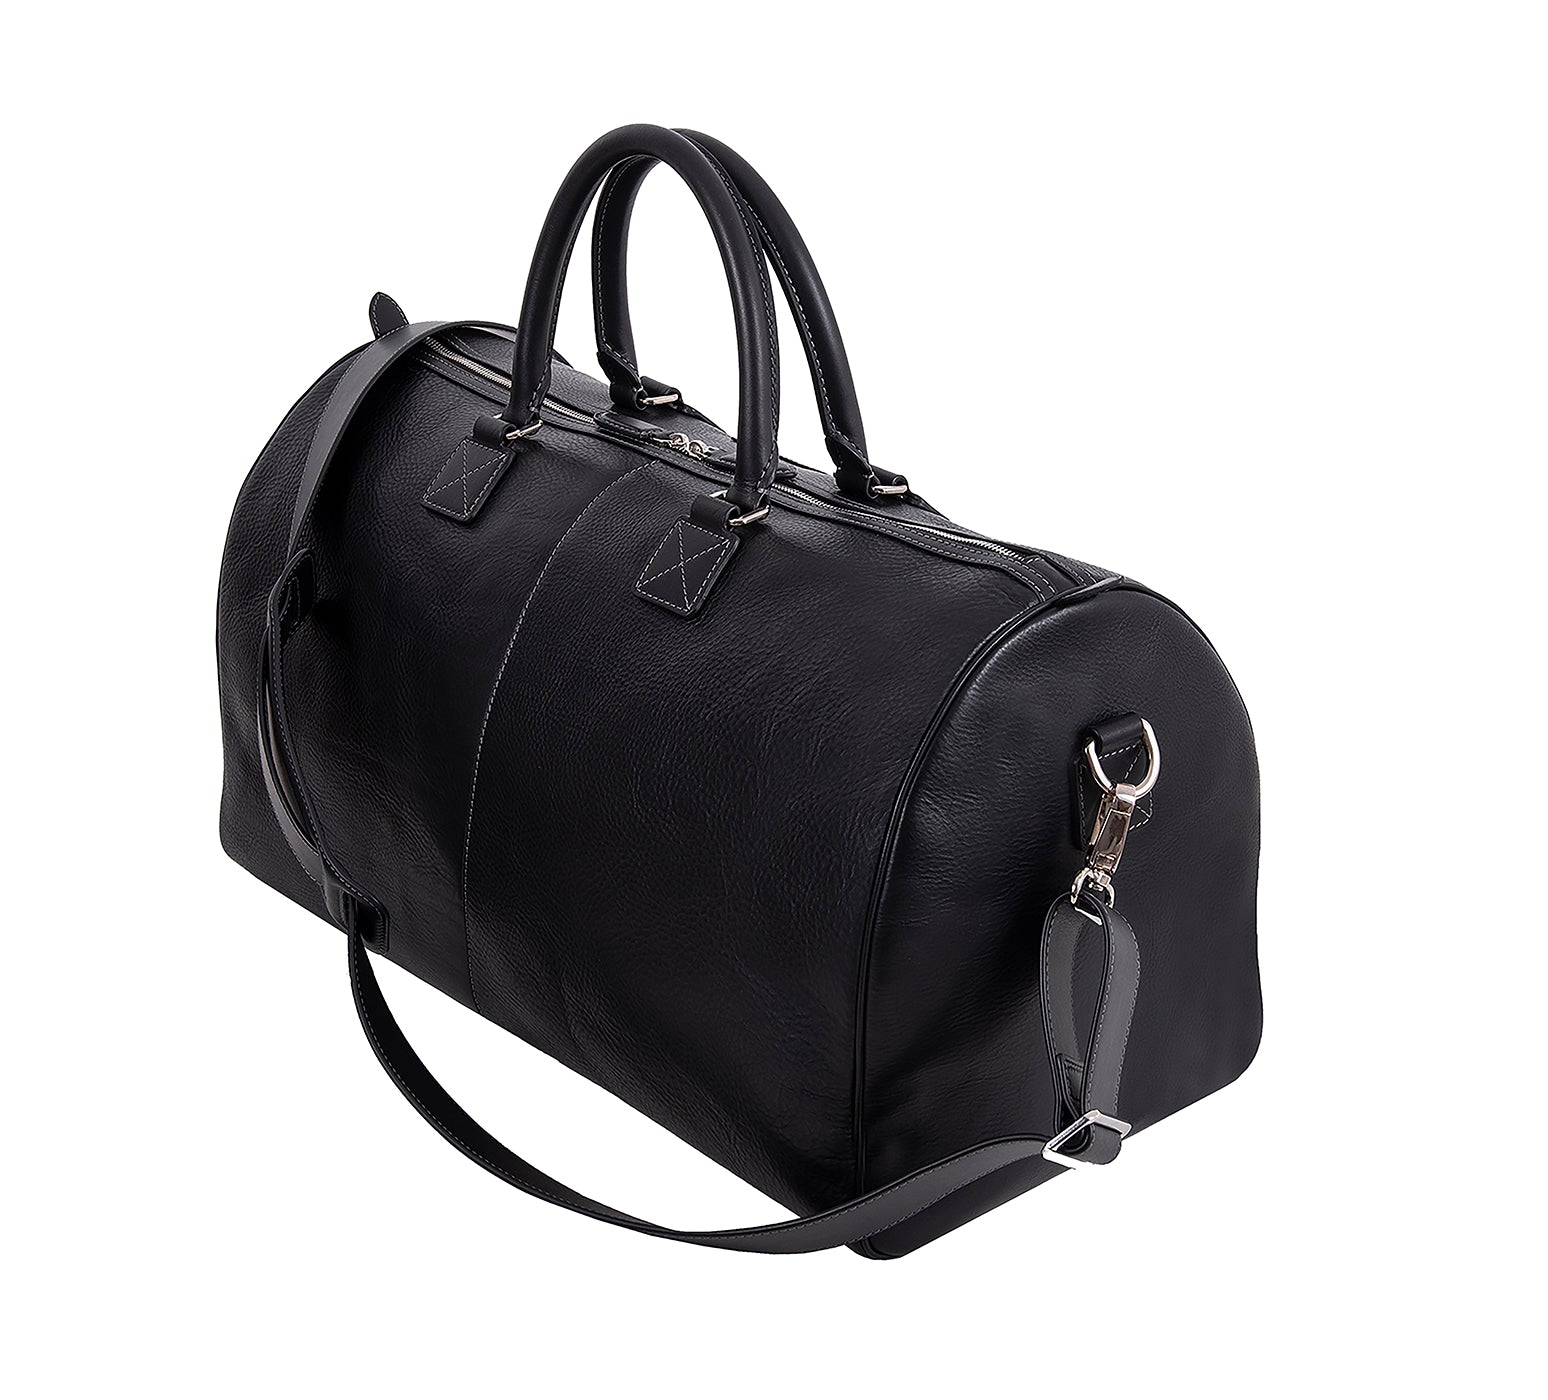 The Portland Mens Leather Travel Bag from Rydal in 'Black' showing side of bag.